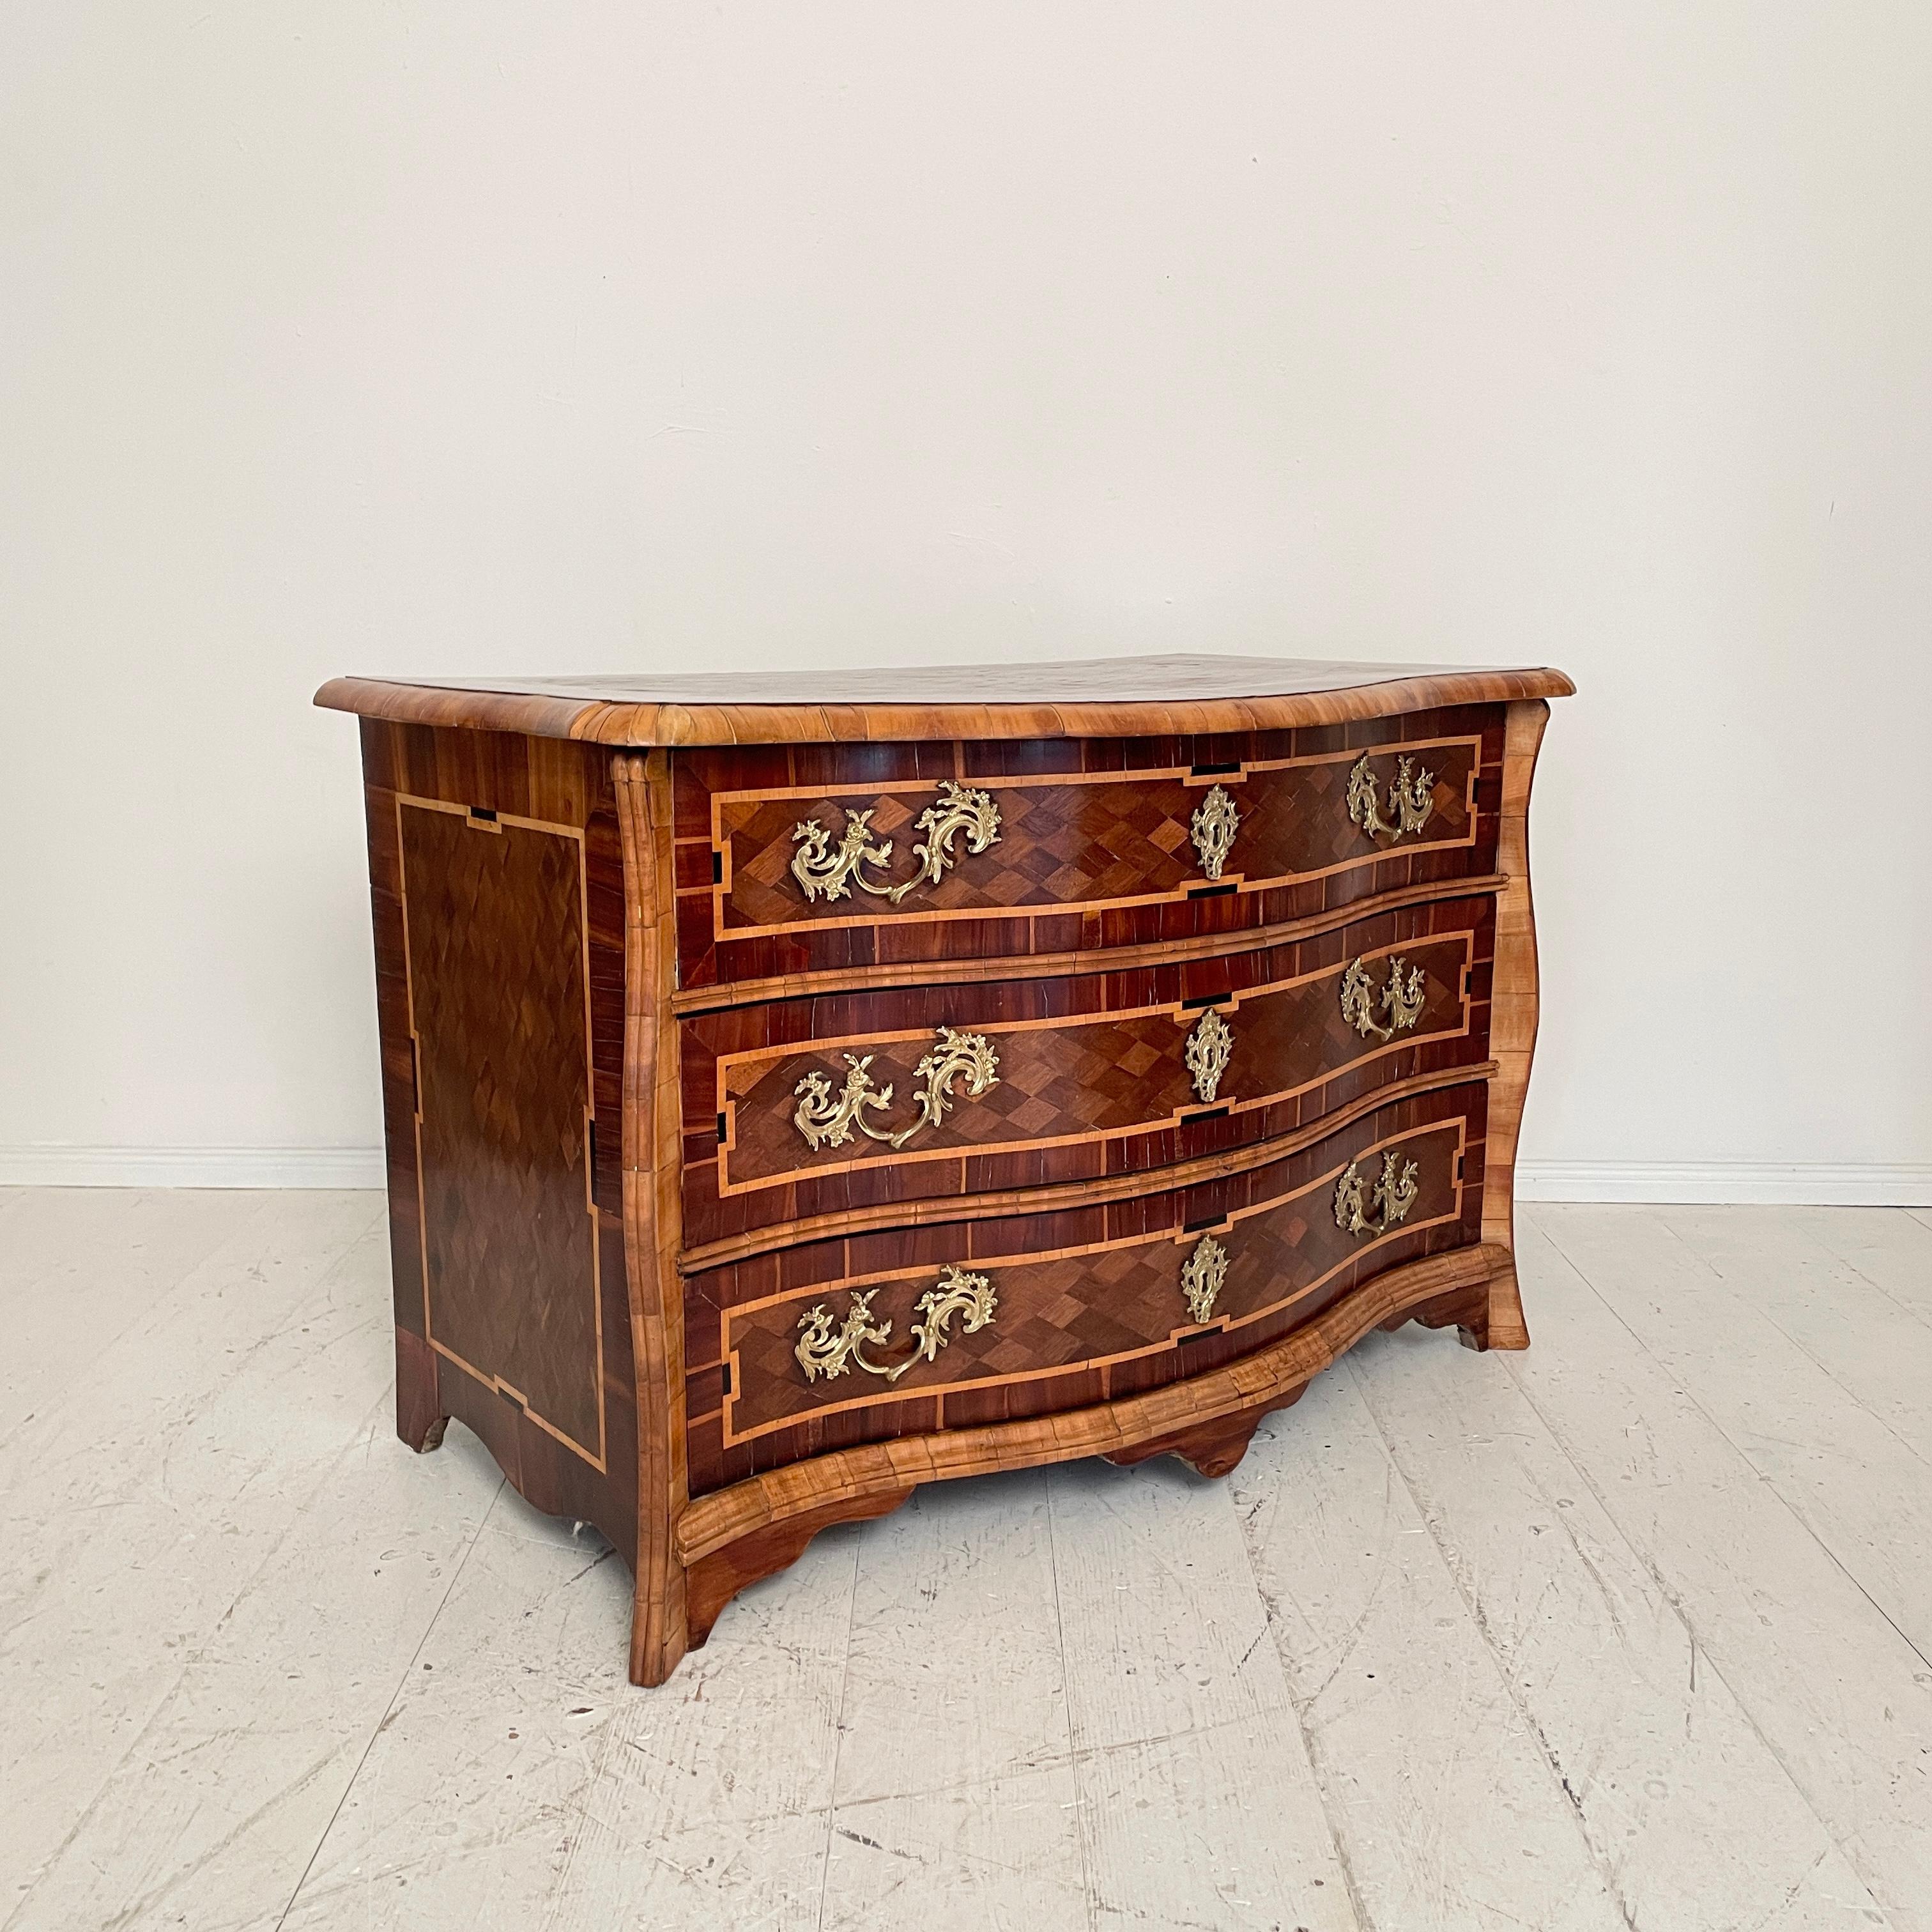 18th Century Dresdner Baroque Commode in Brown Walnut and Amaranth, Around 1760 For Sale 4